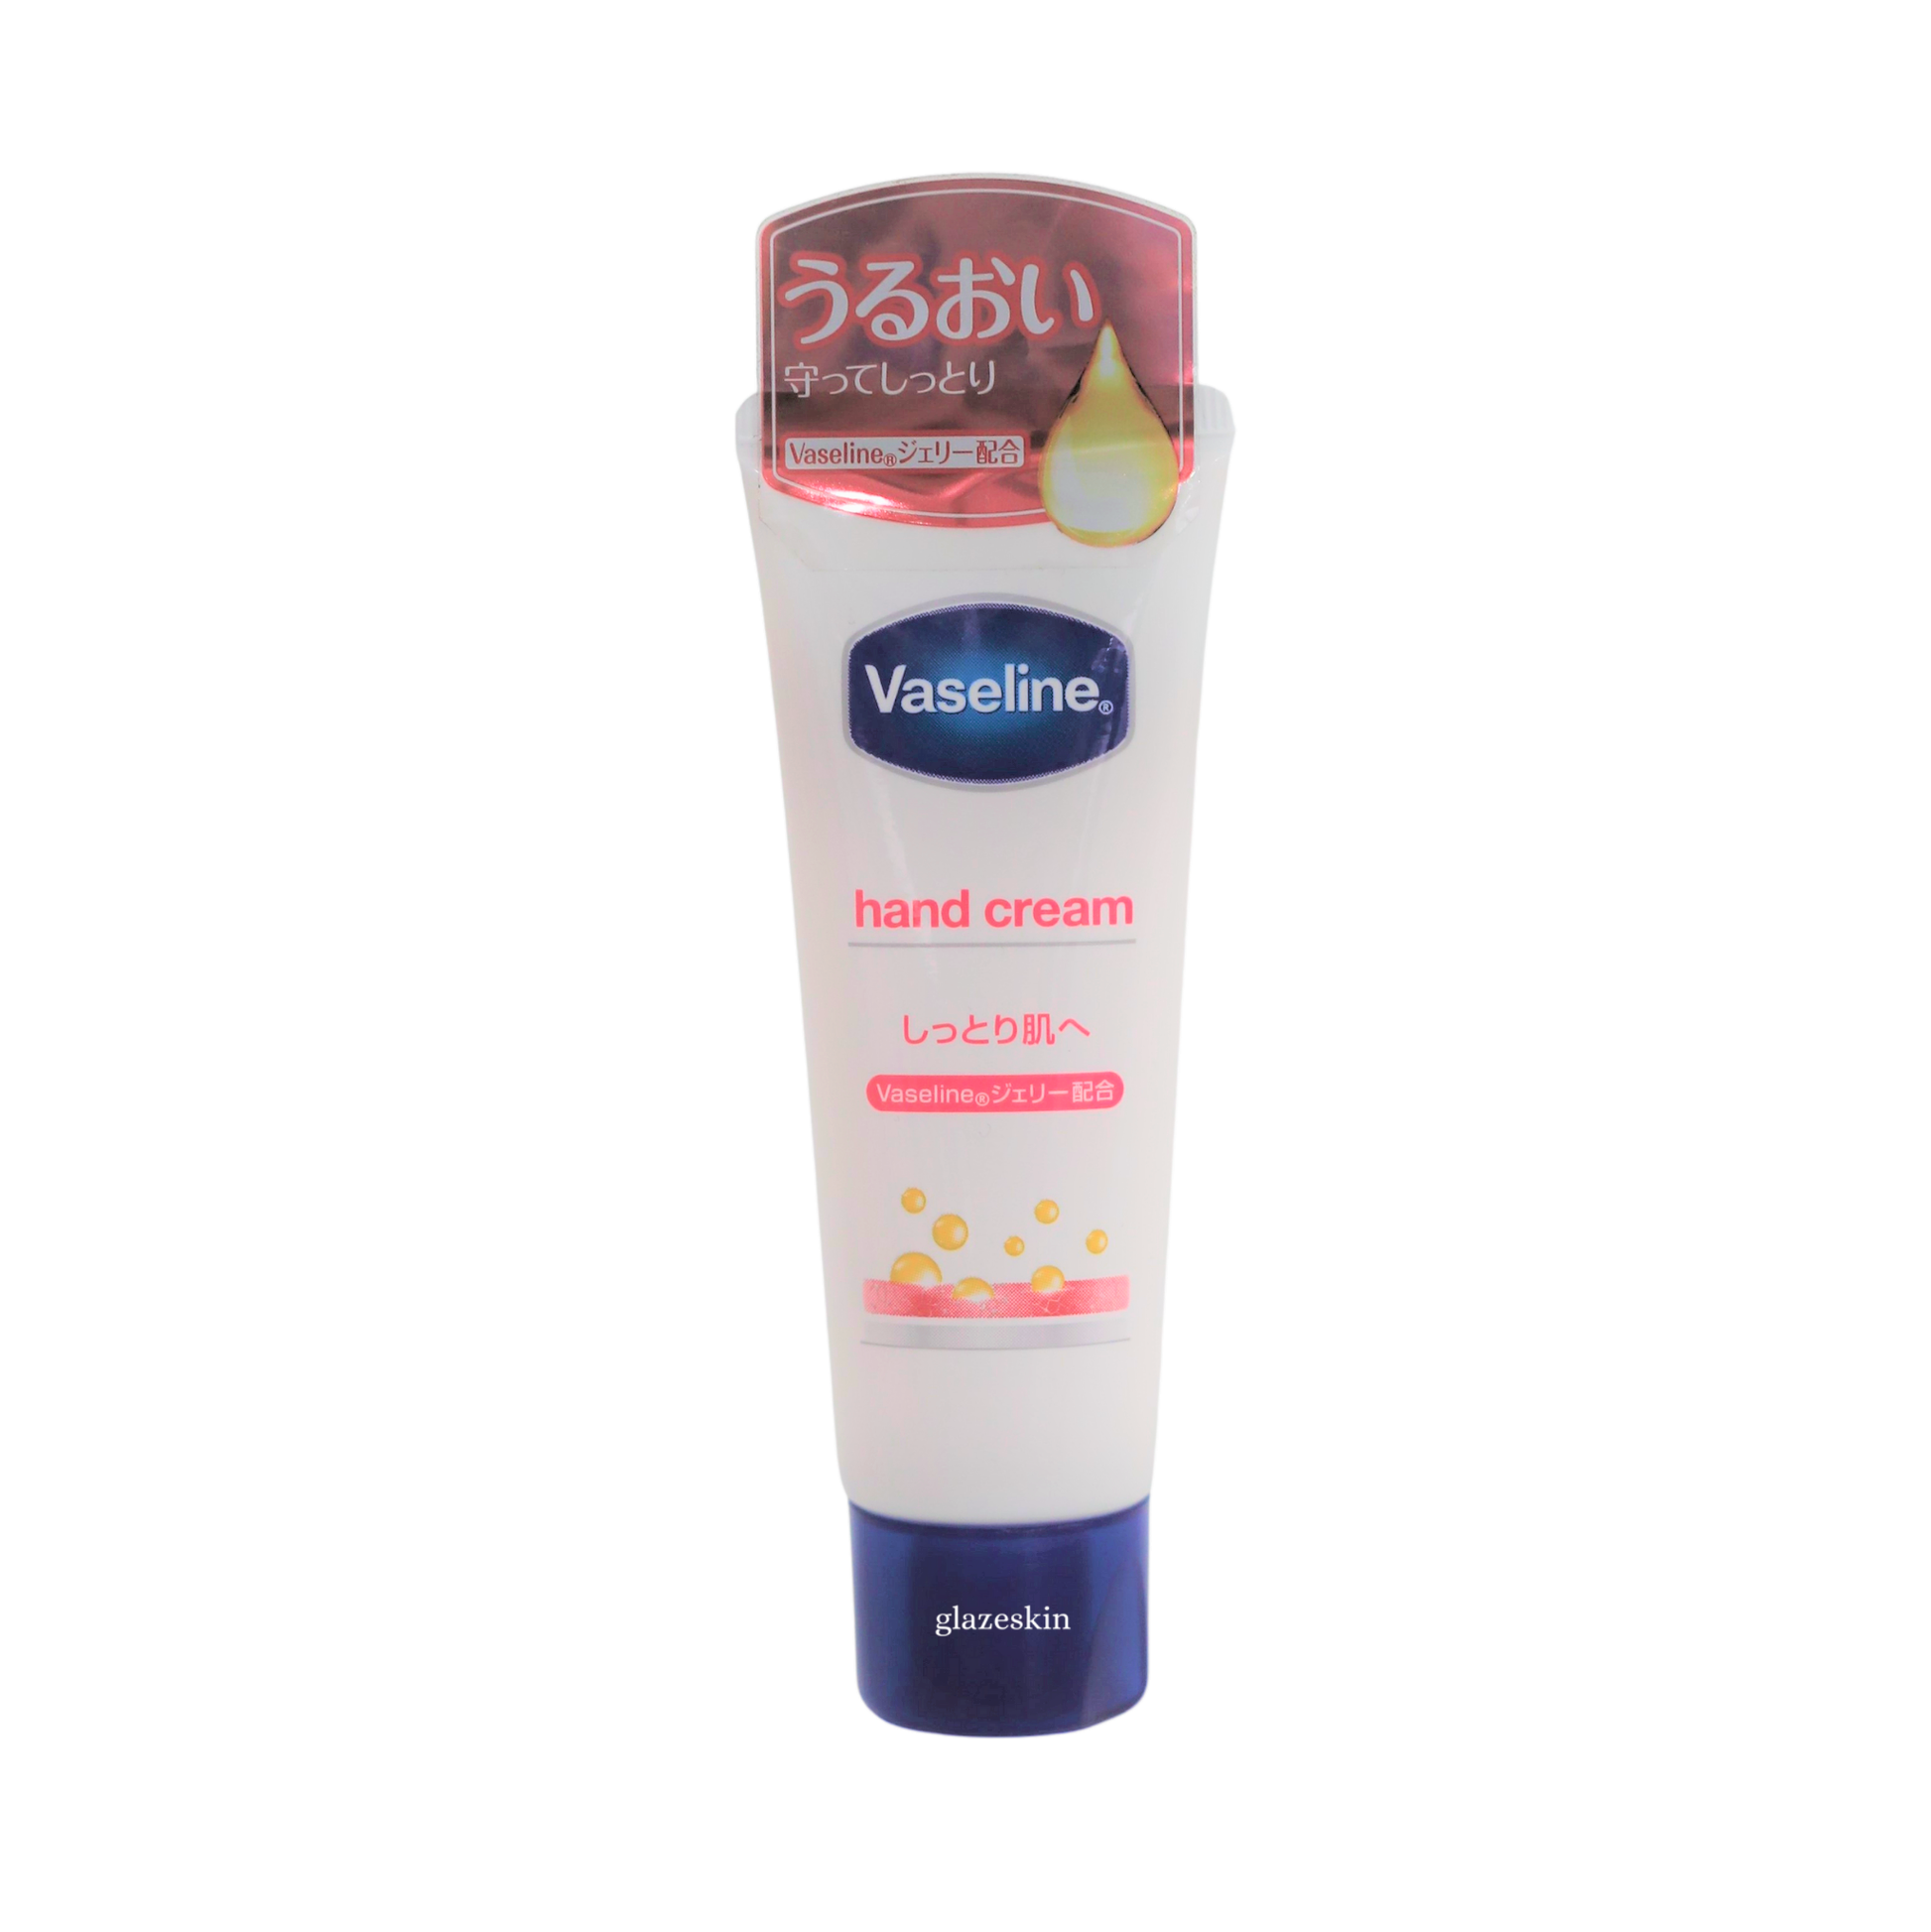 Vaseline Intensive Care Healthy Hand Stronger Nails Hand Cream REVIEW -  BEST NAIL TREATMENT EVER?? - YouTube